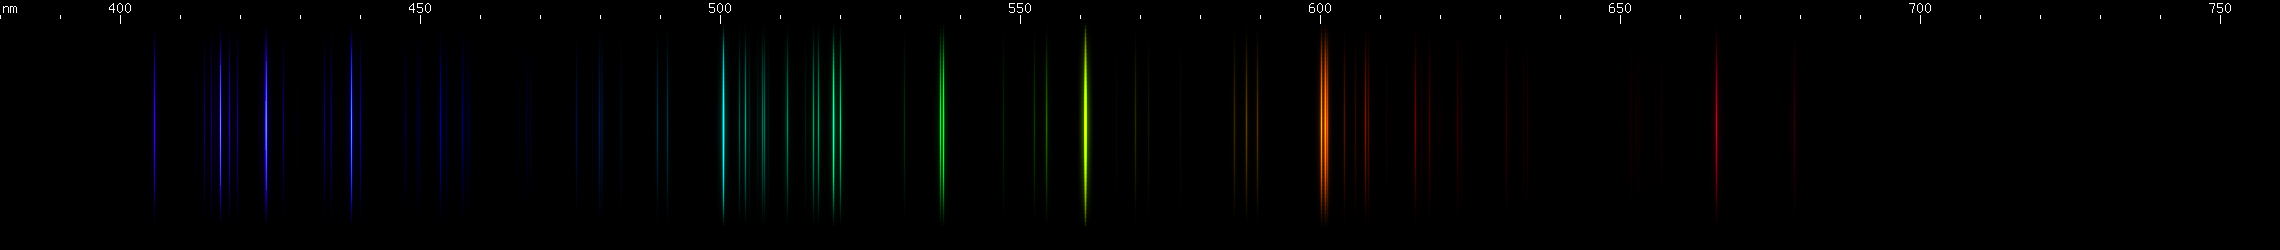 Spectral lines of Lead.